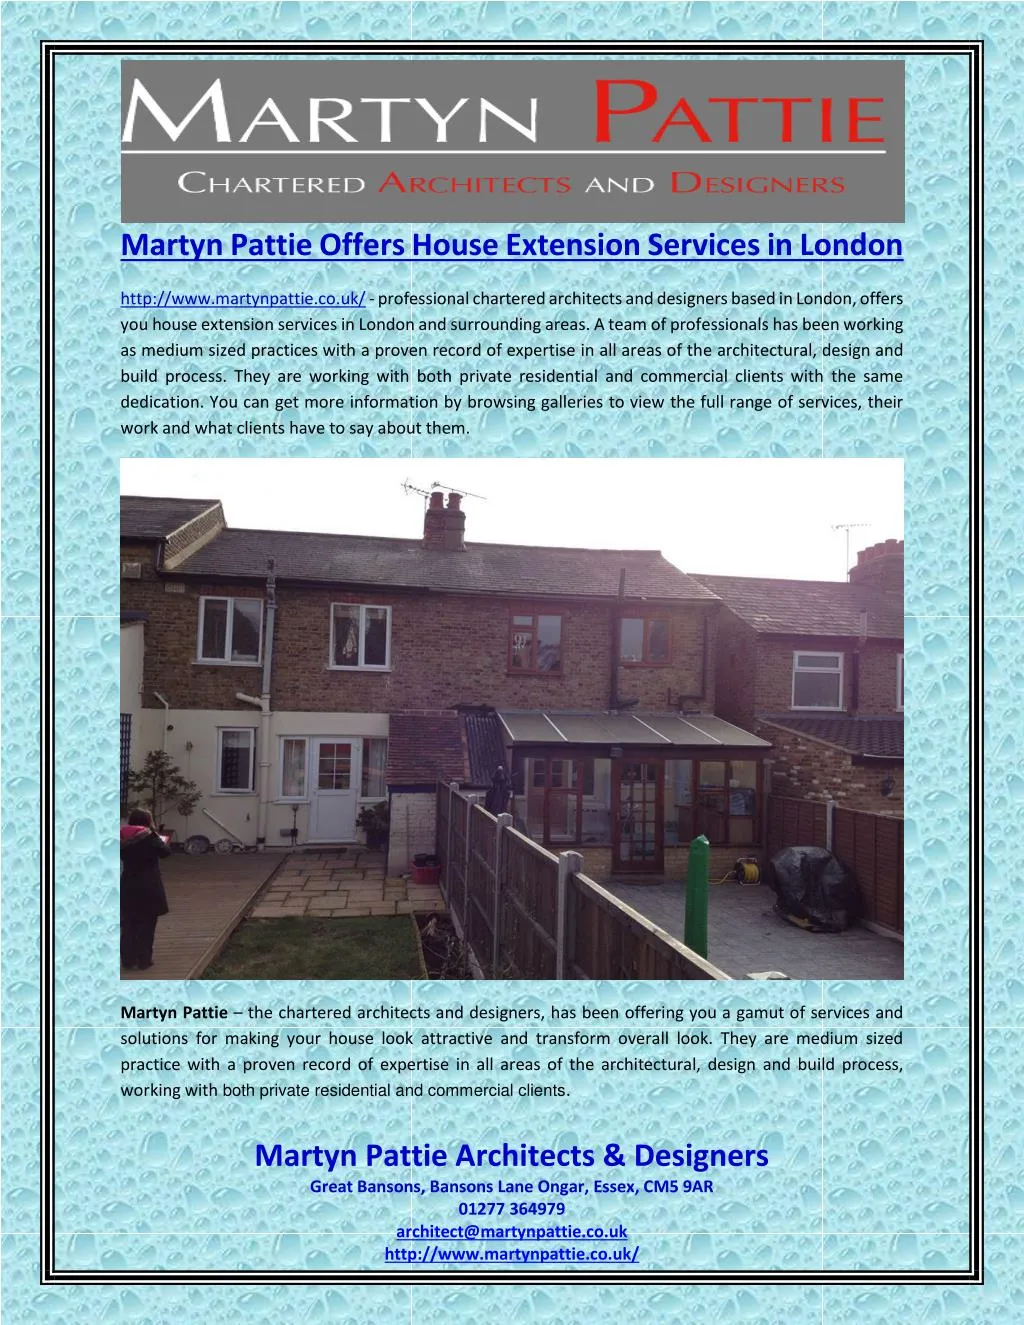 martyn pattie offers house extension services